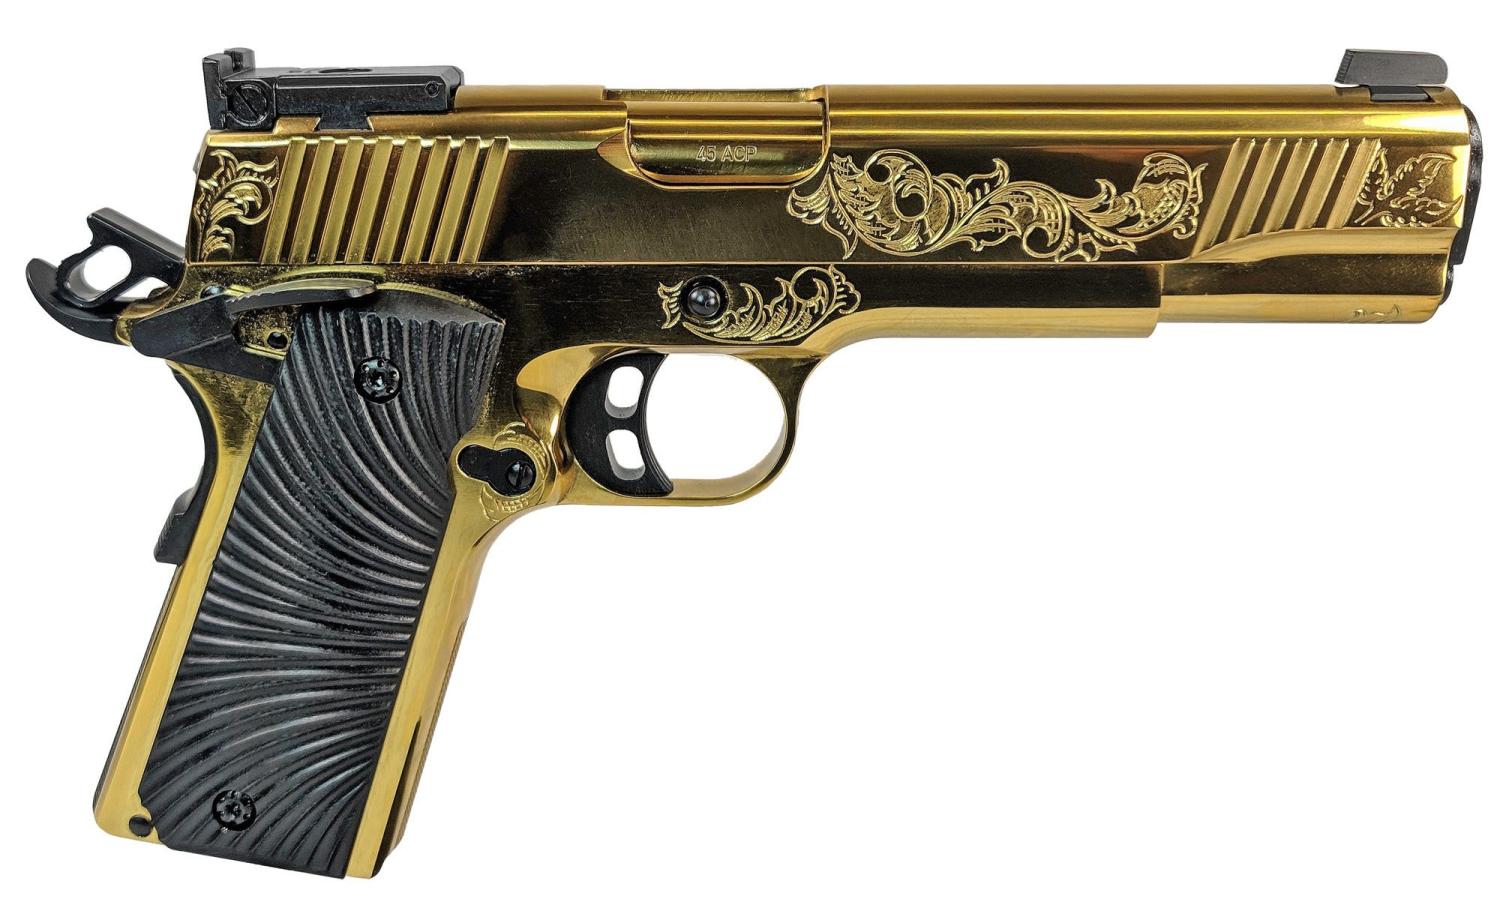 EAA Corp MC1911 Deluxe Gold .45 ACP 5" Barrel 8-Rounds Engraved - $1229.99 ($7.99 S/H on firearms)